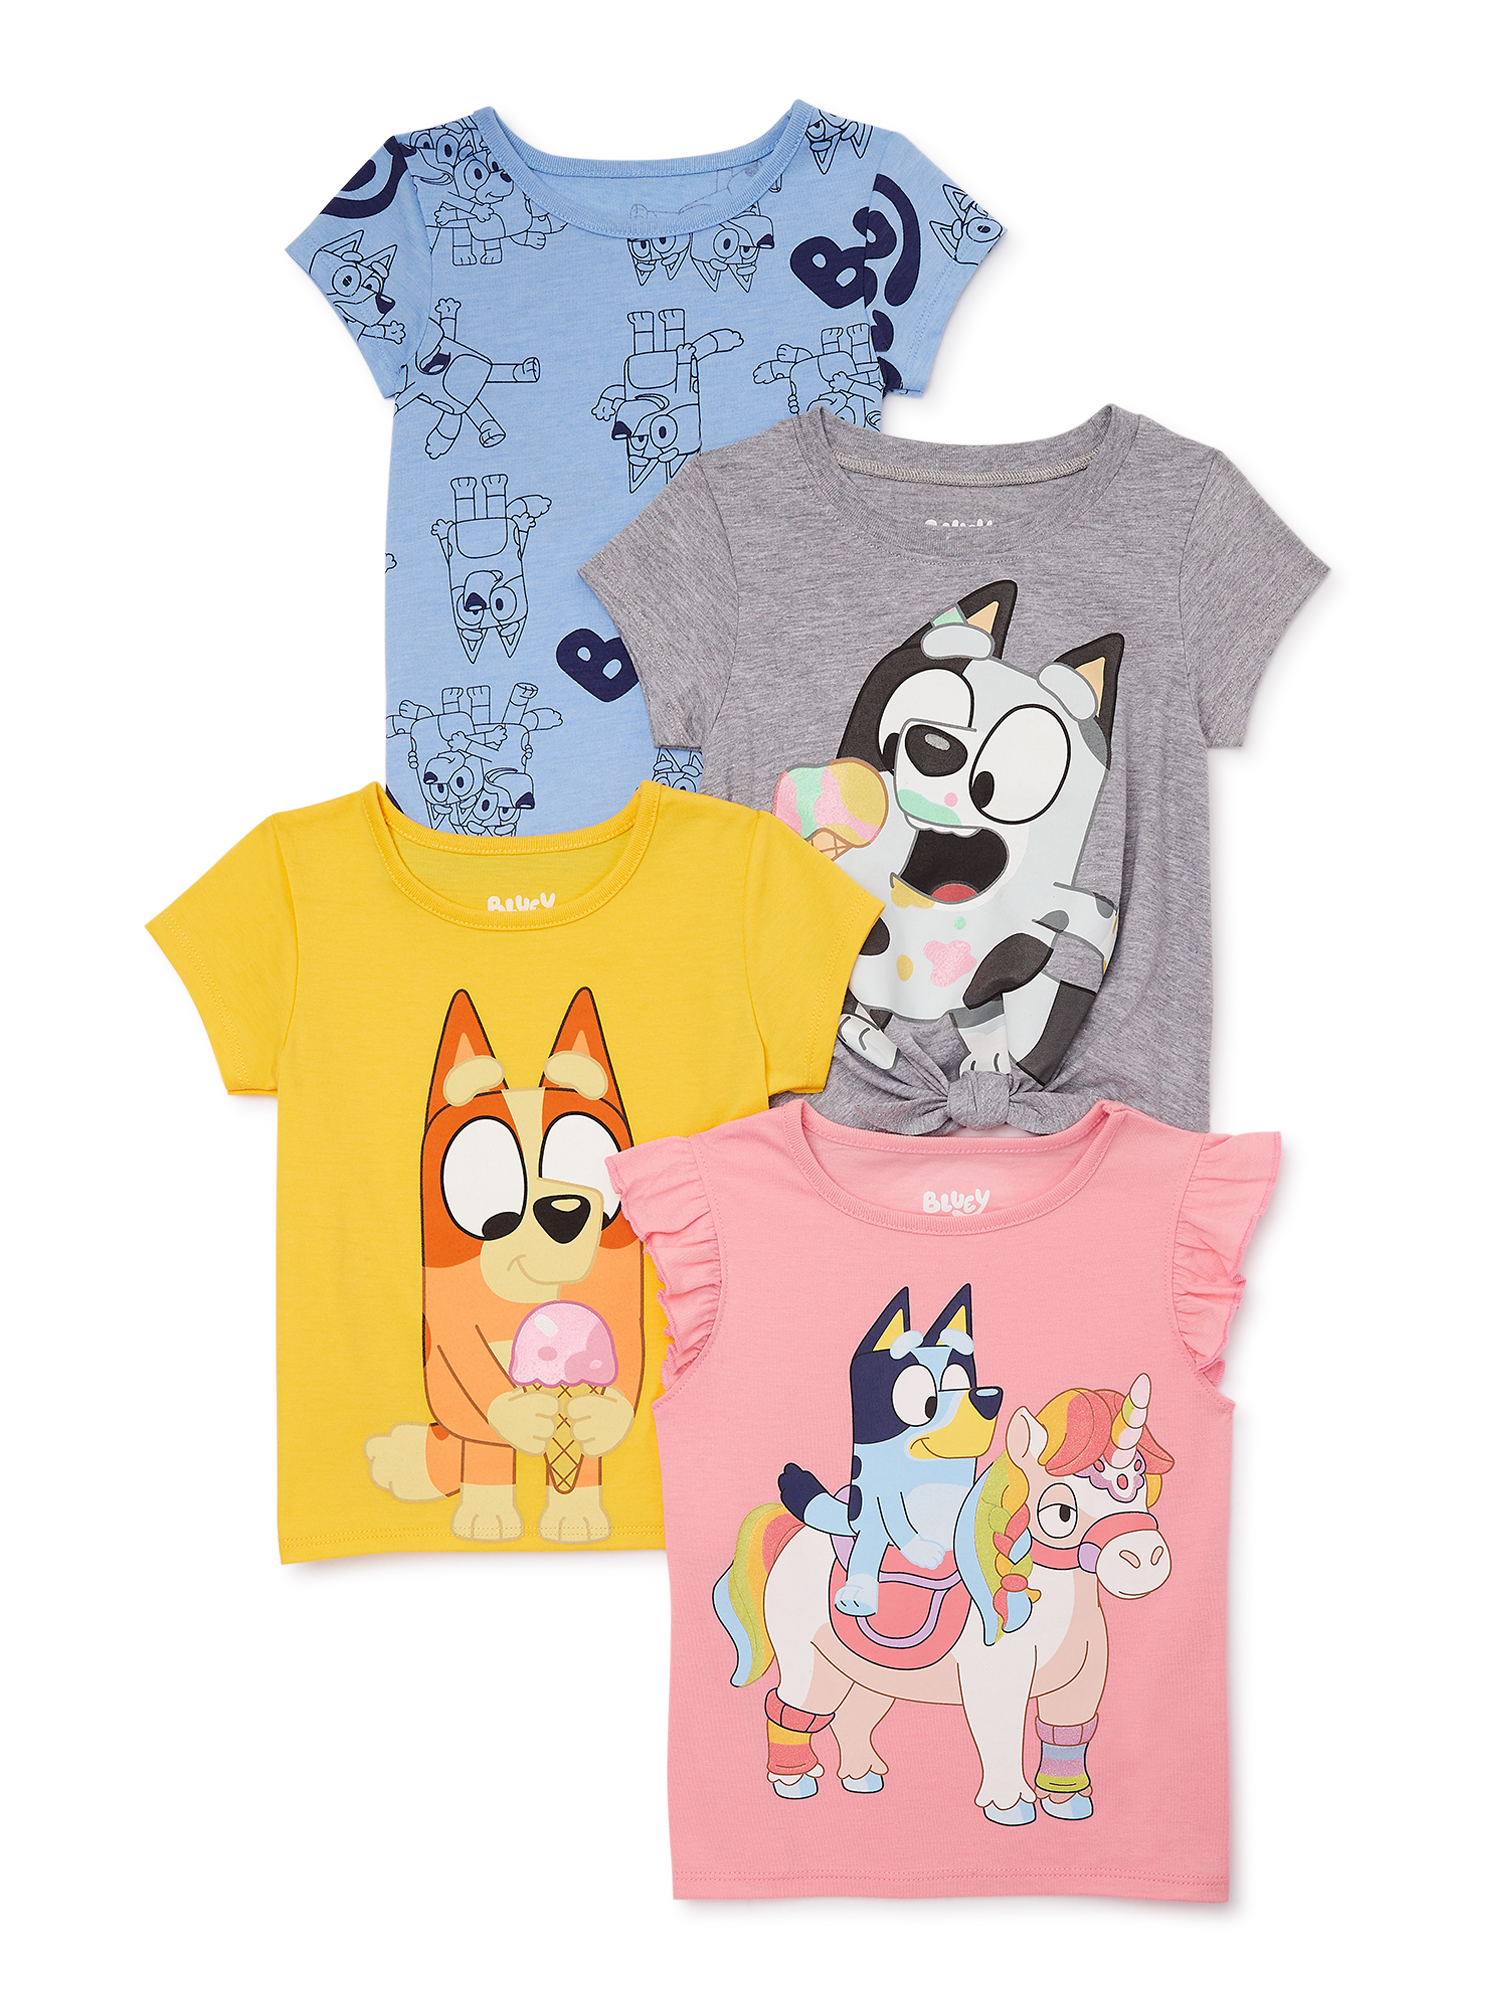 Bluey Toddler Girl Graphic Print Fashion T-Shirts, 4-Pack, Sizes 2T-5T - image 1 of 14